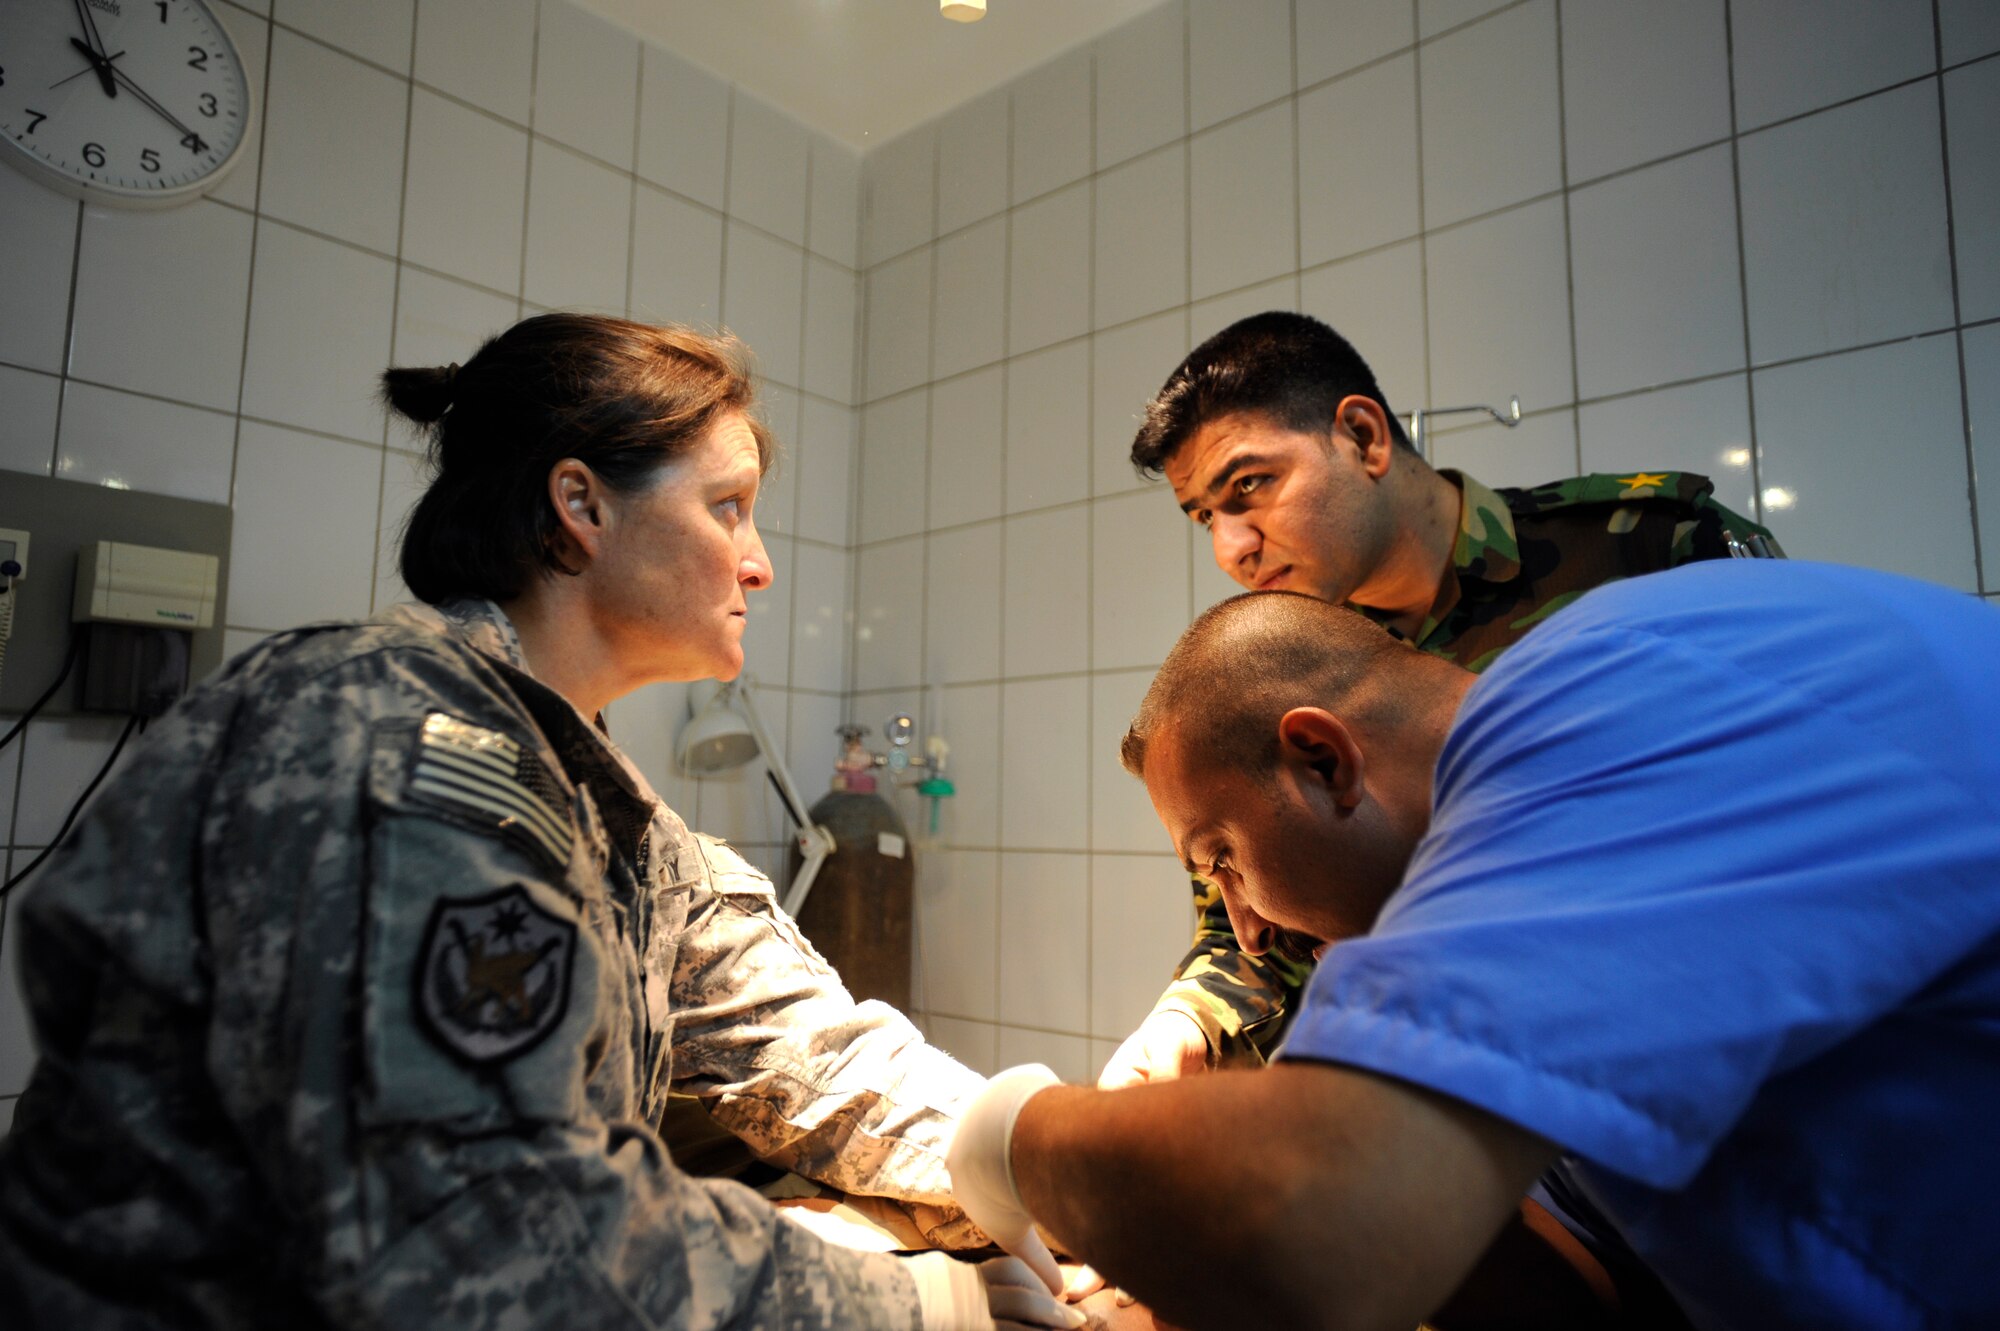 Army Staff Sgt. Barbara Seabert speaks to her Iraqi counterparts while examining a patient Aug. 17, 2009, at Camp Ur, Iraq. The Iraqi camp boasts a fully functioning medical clinic complete with a three-bay emergency room, pharmacy, dentist, radiology department and public health, as well as a highly trained team of doctors, nurses and technicians on staff. Sergeant Seabert is a Tallil Logistics Military Advisory Team medical adviser. (U.S. Air Force photo/Staff Sgt. Shawn Weismiller) 